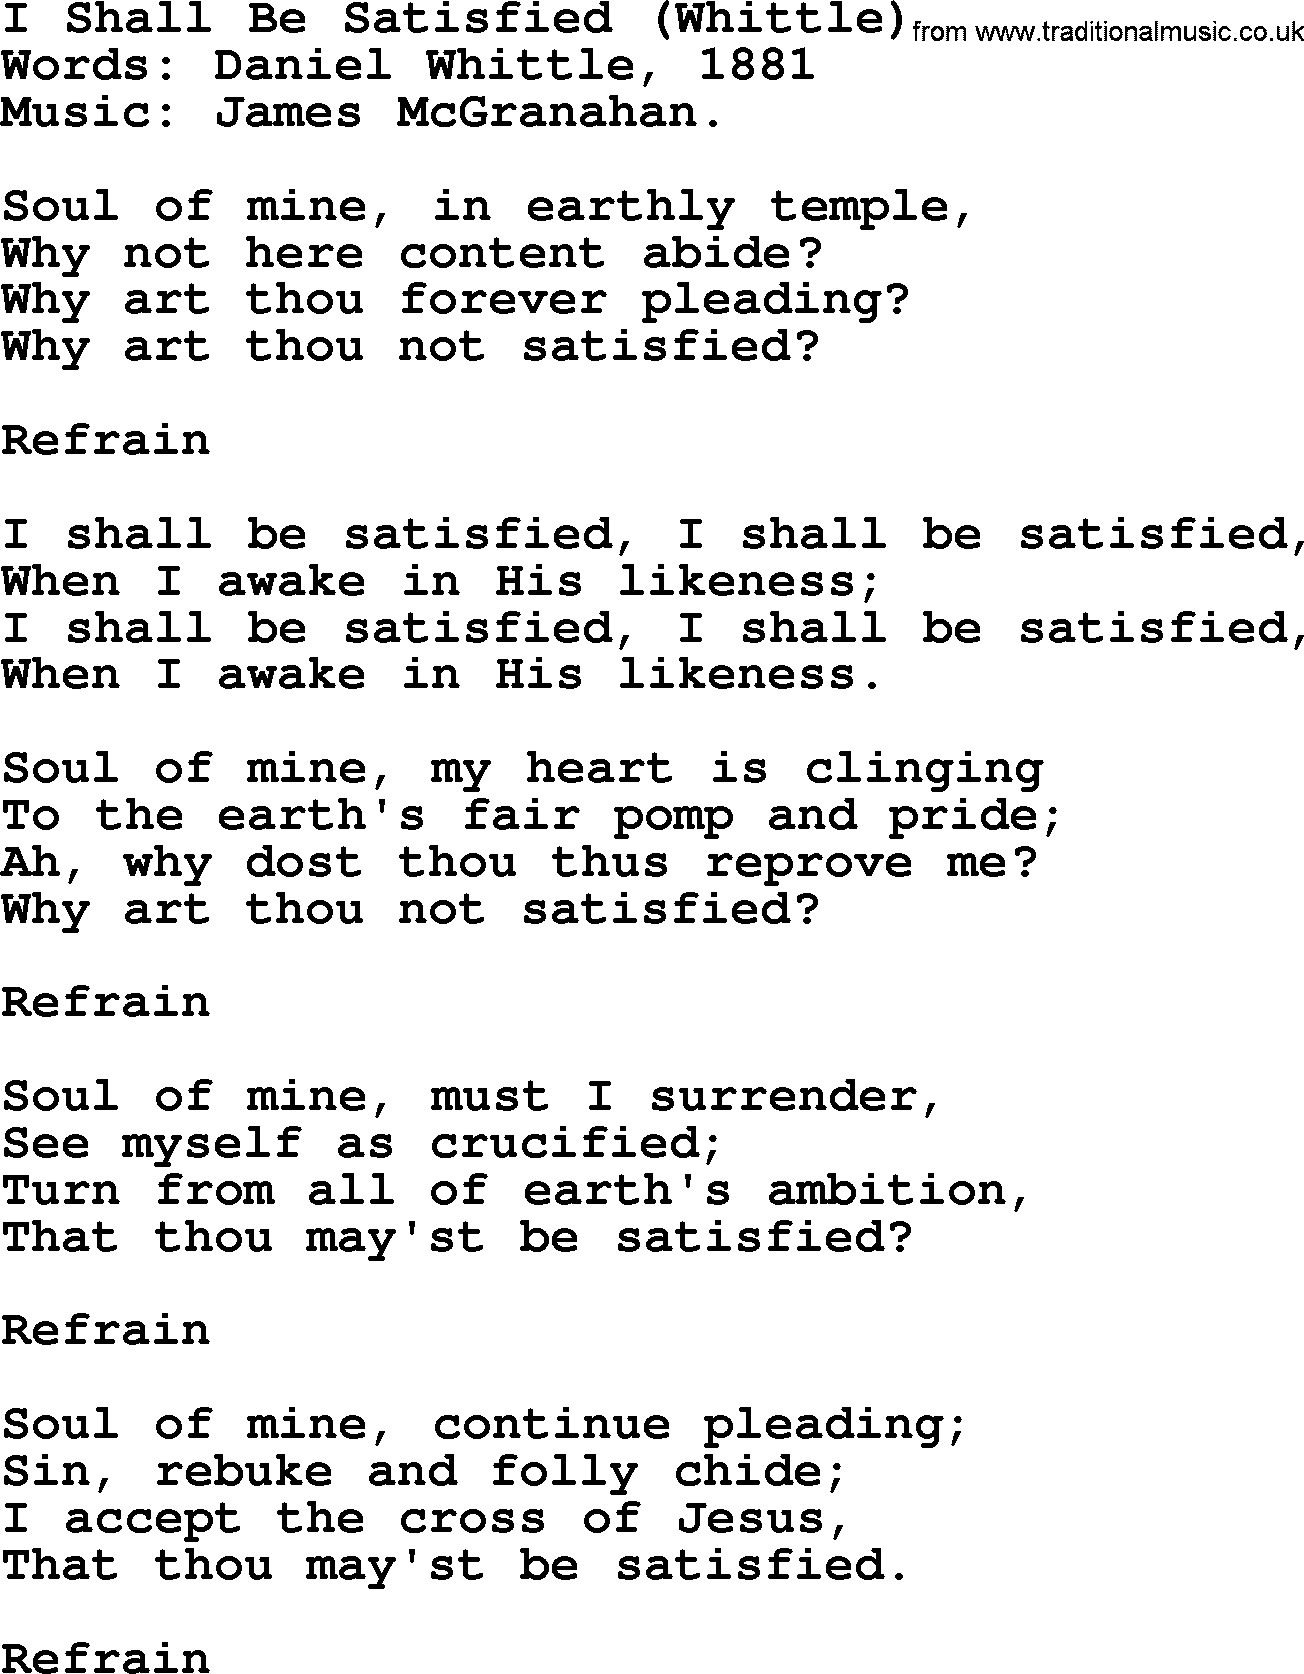 Songs and Hymns about Heaven: I Shall Be Satisfied (whittle) lyrics with PDF